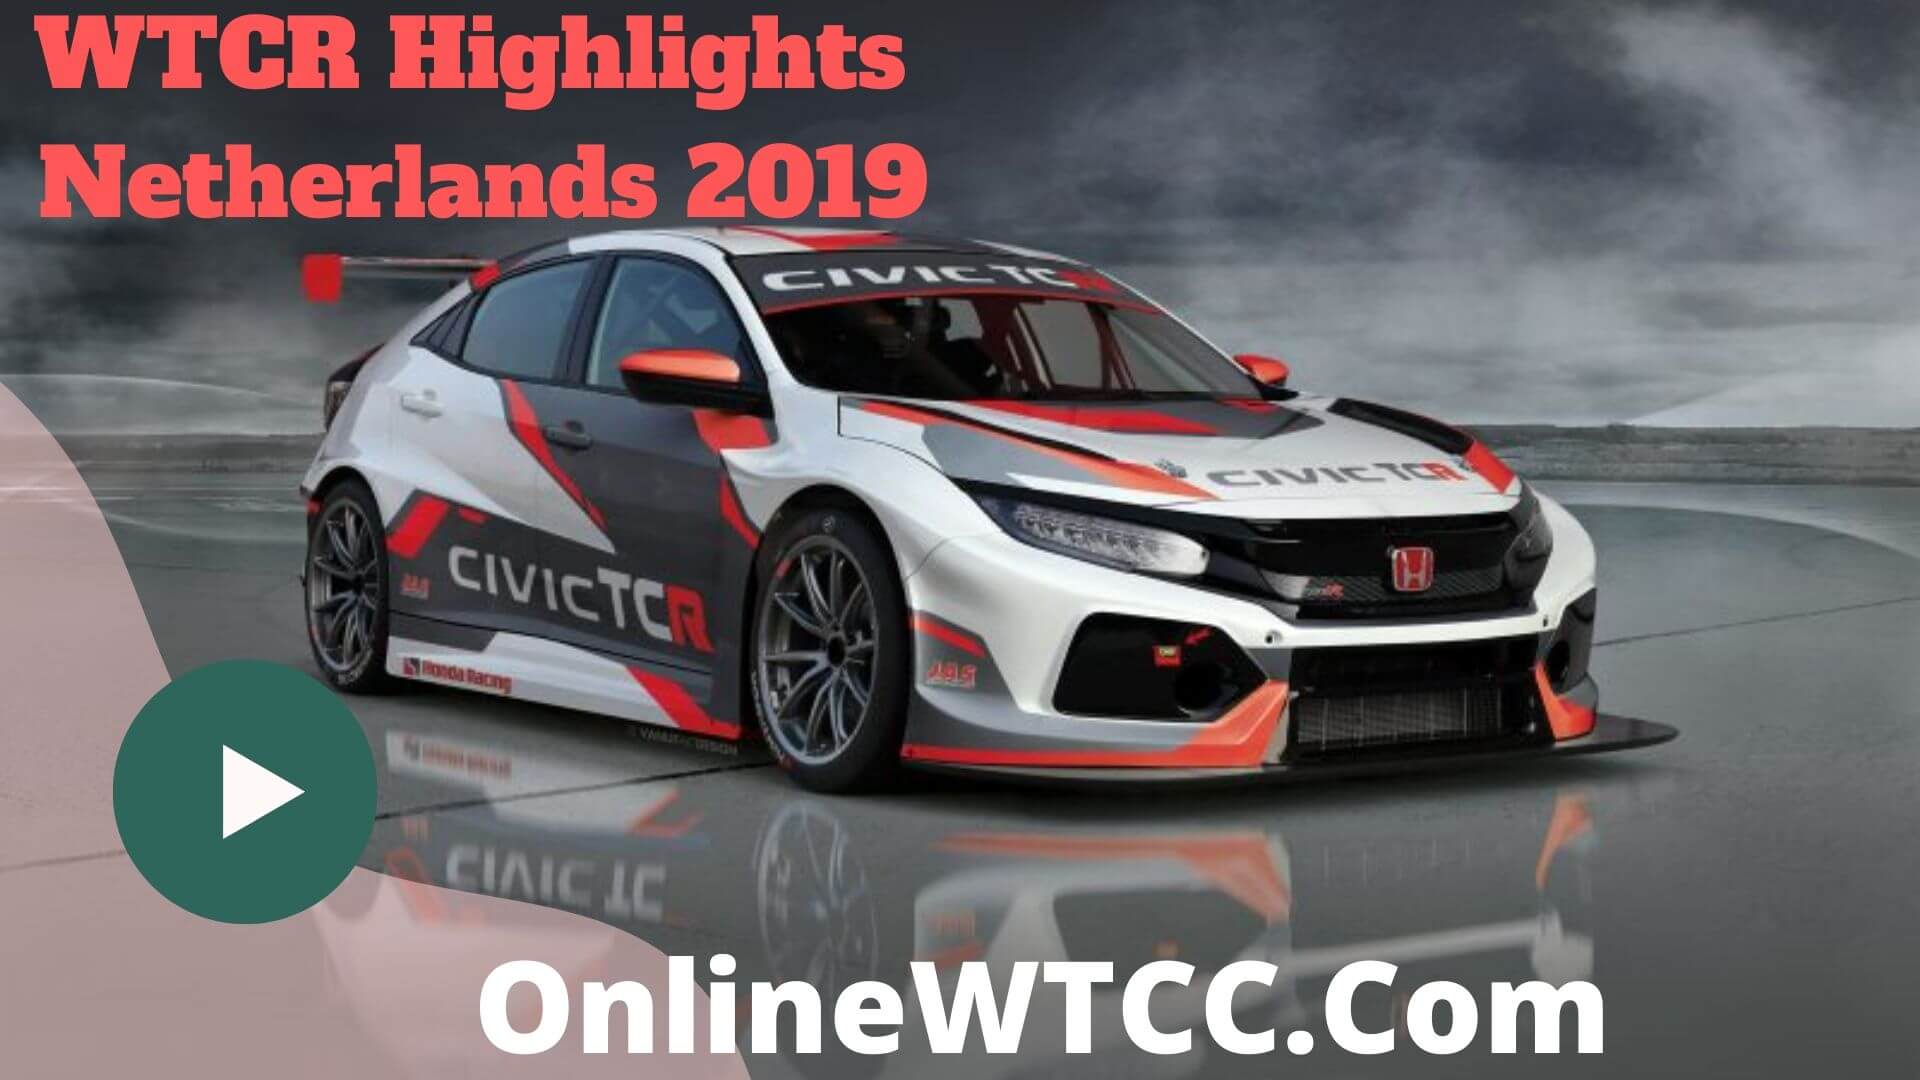 The Netherlands WTCR Highlights 2019